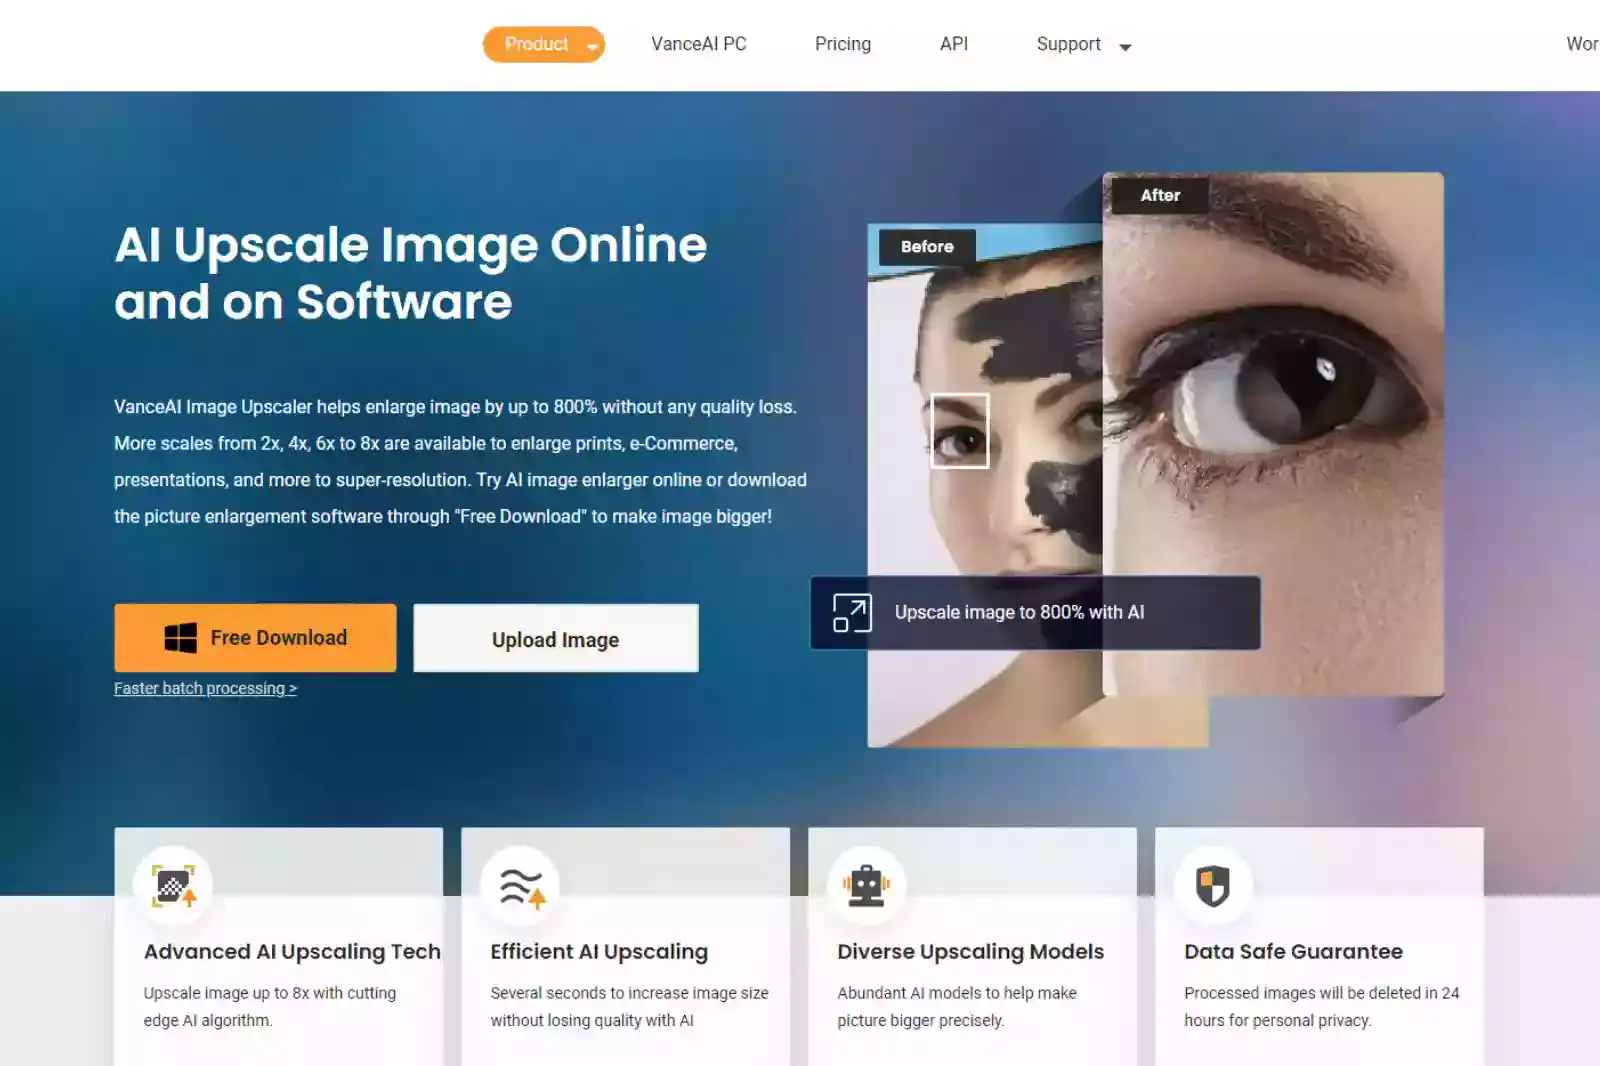 Home Page of Vance AI Image Upscaler